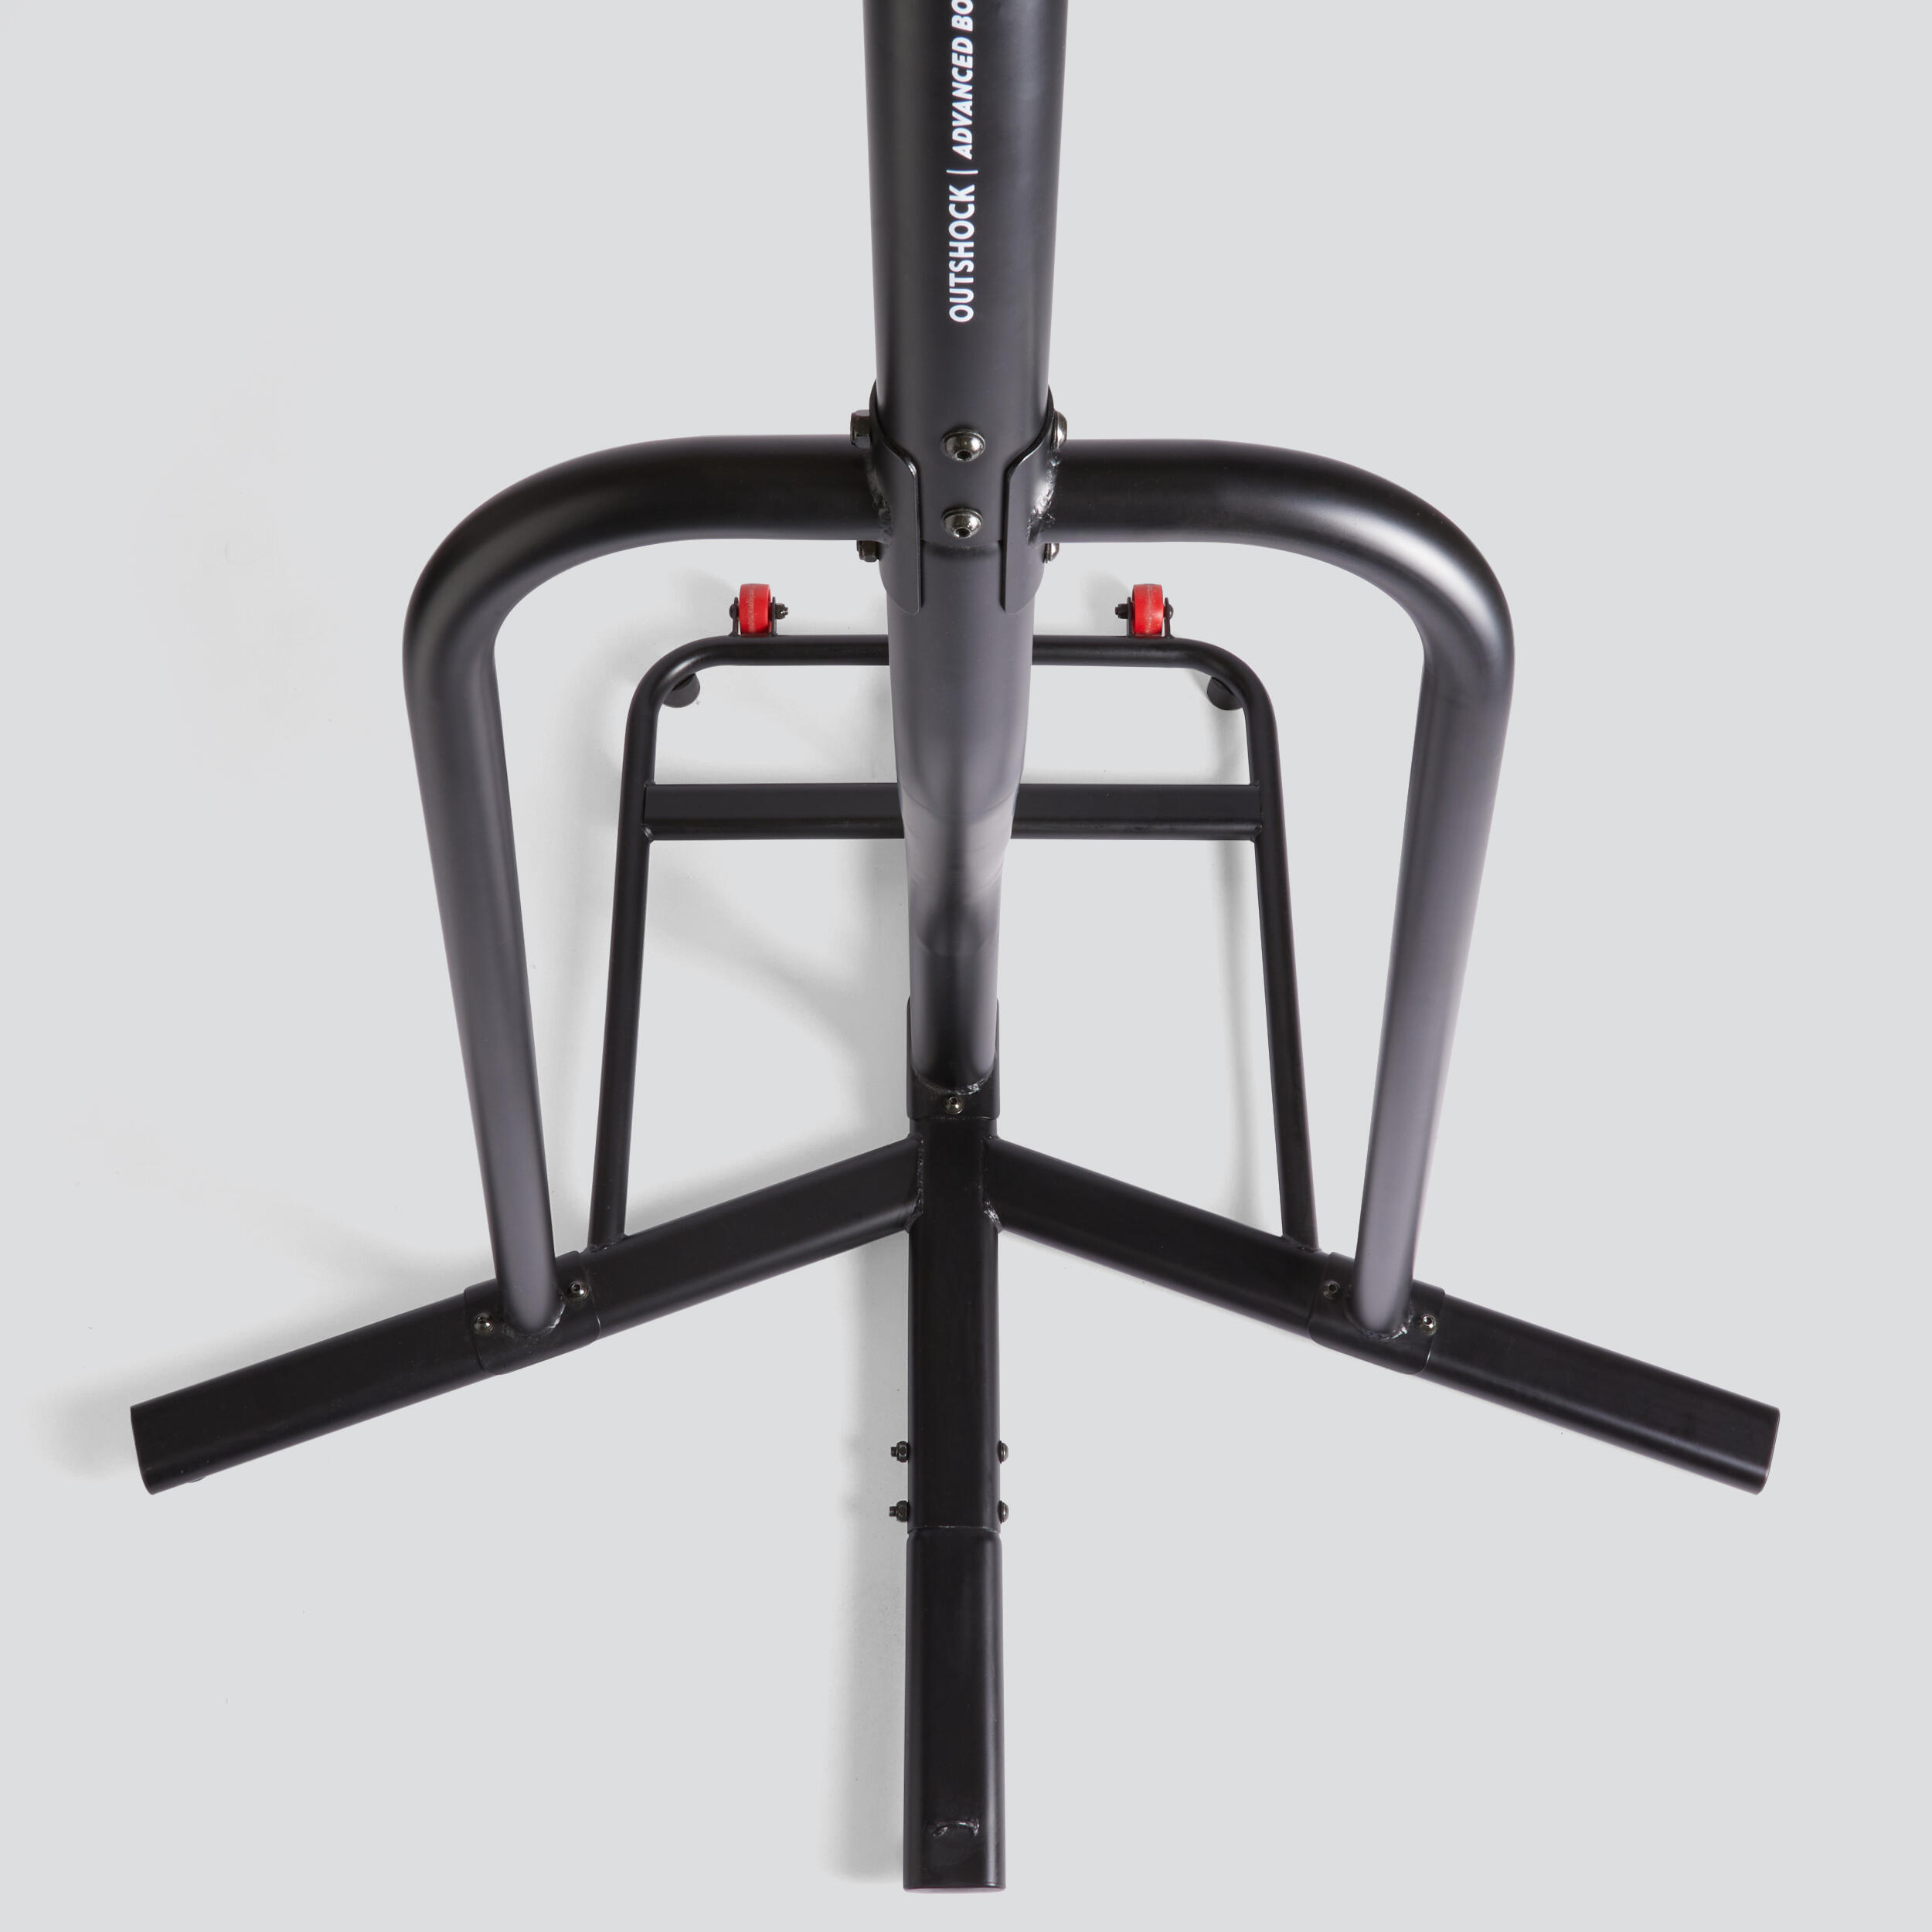 Free-standing Versatile and Weightable Punching Bag Stand 900 7/9